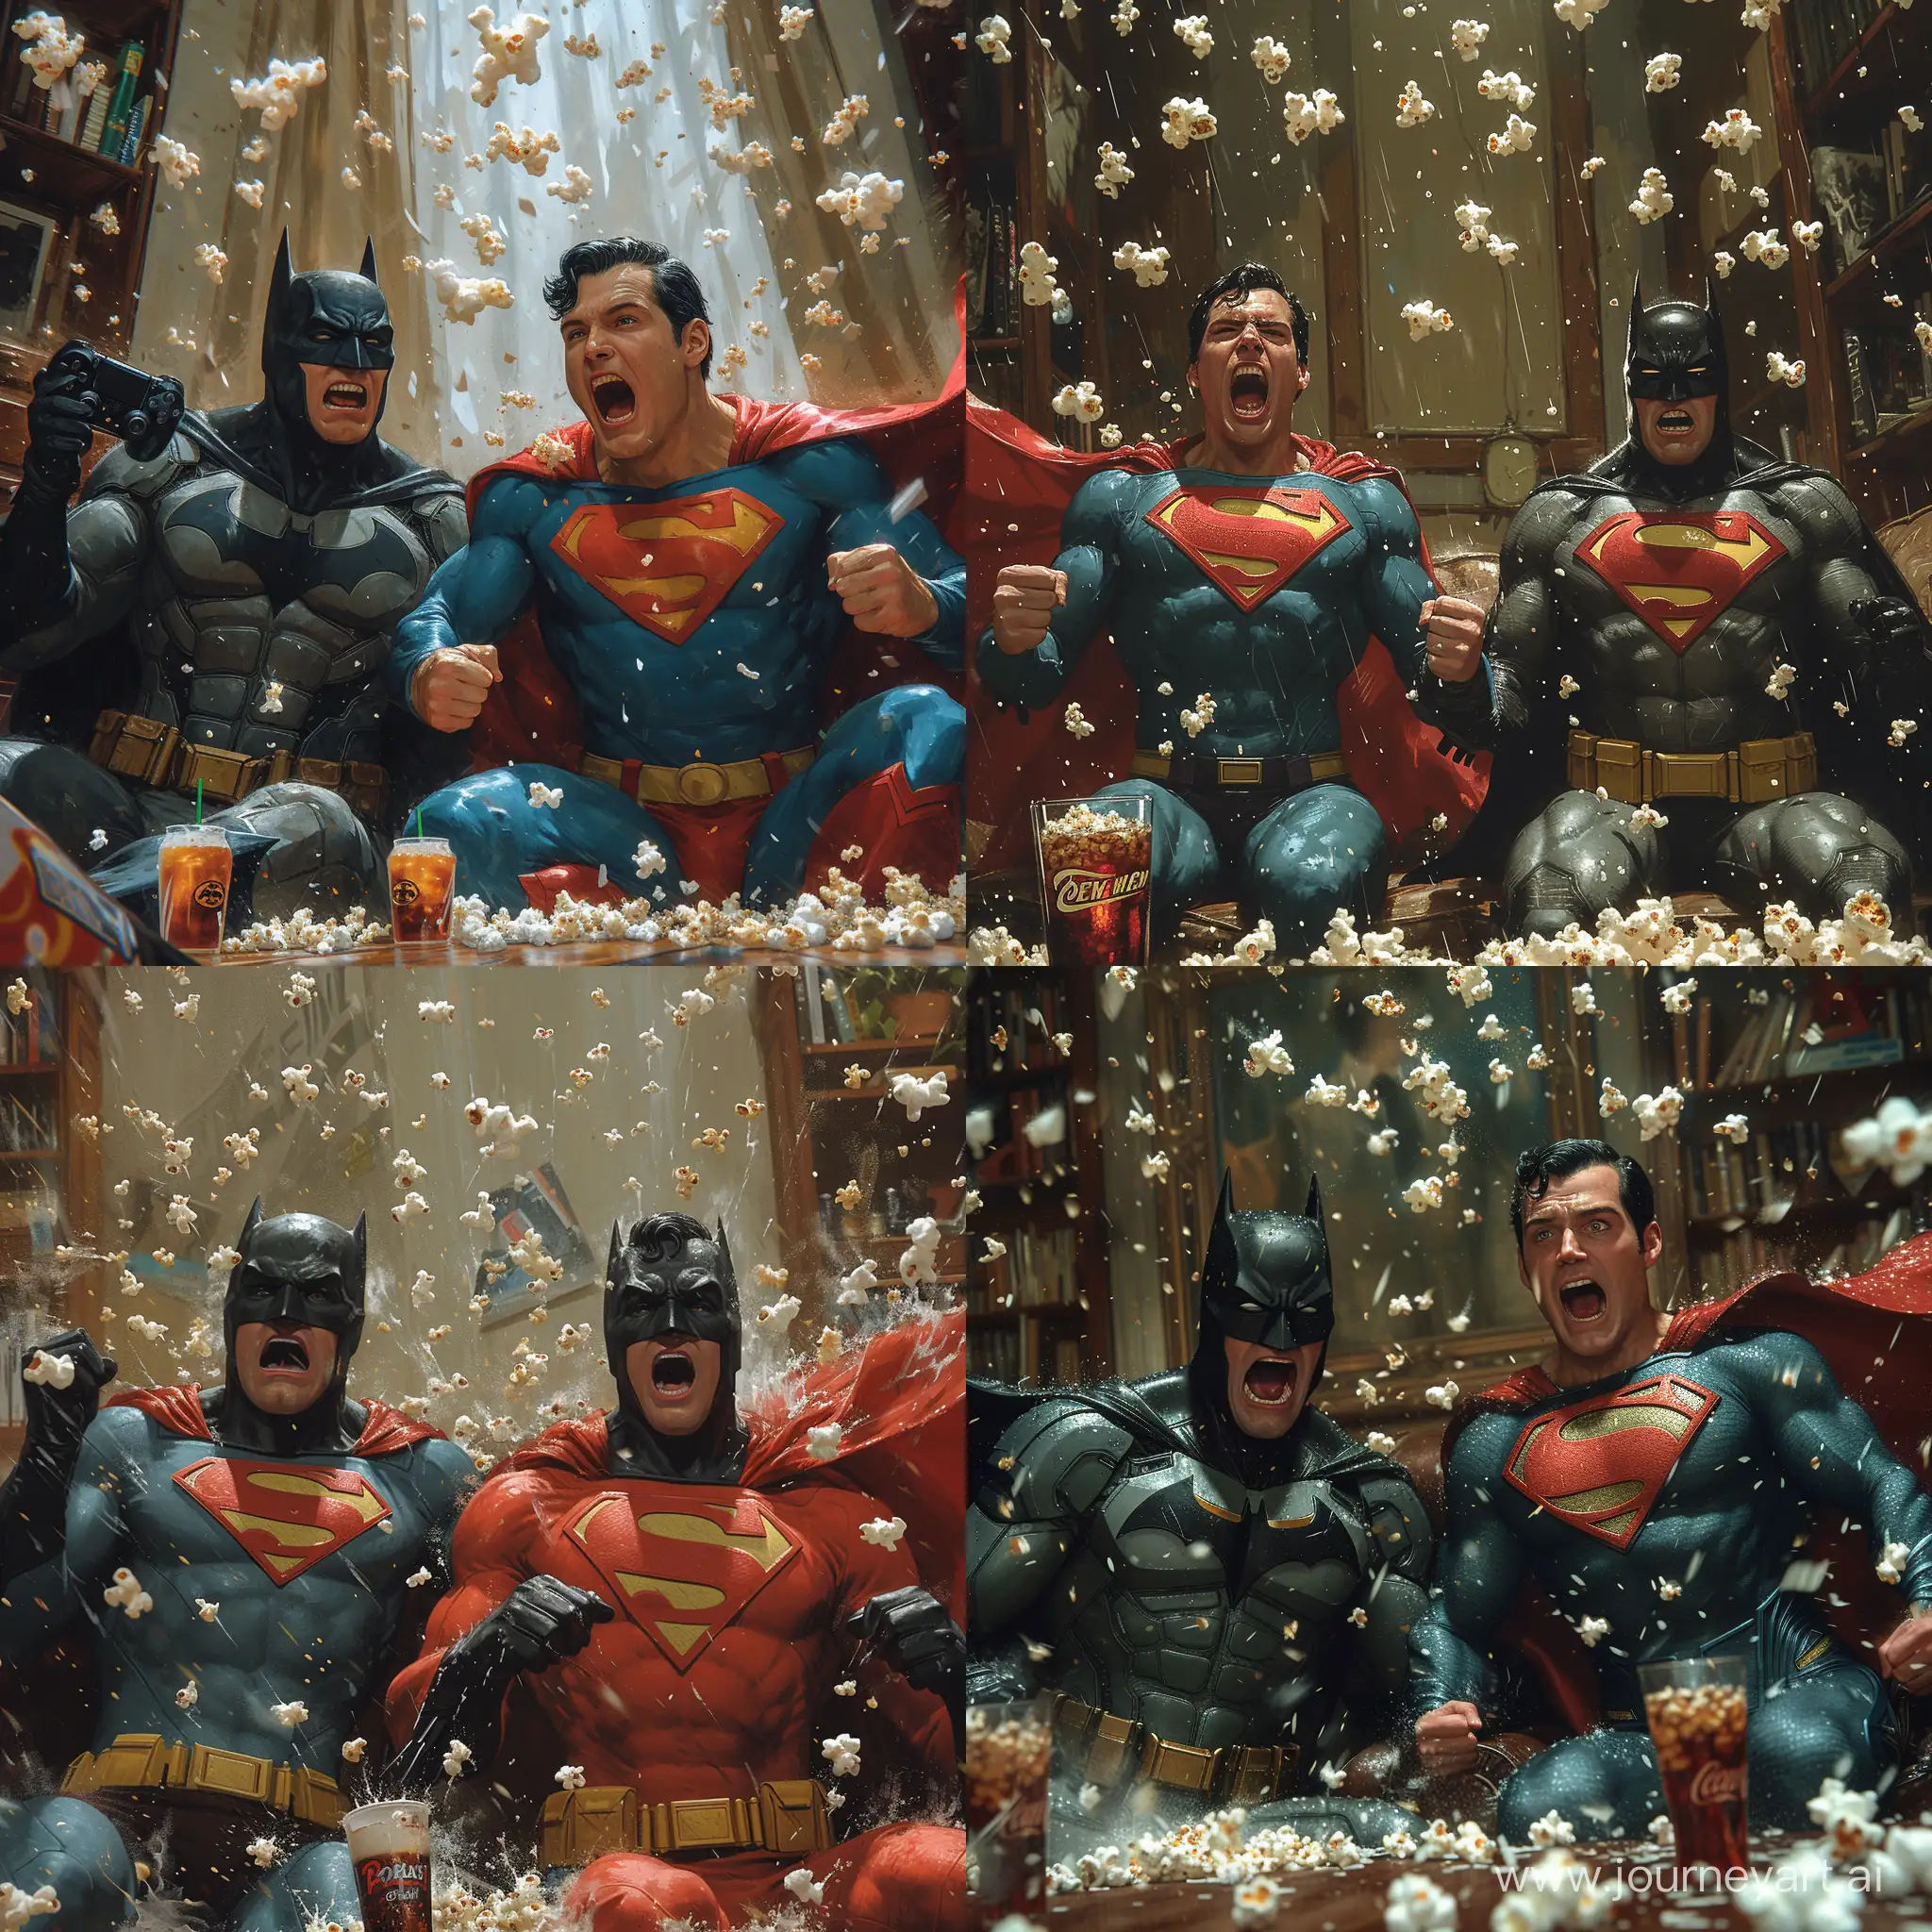 Superman-and-Batman-Gaming-Chaos-Dynamic-Duo-in-Action-with-Popcorn-Showers